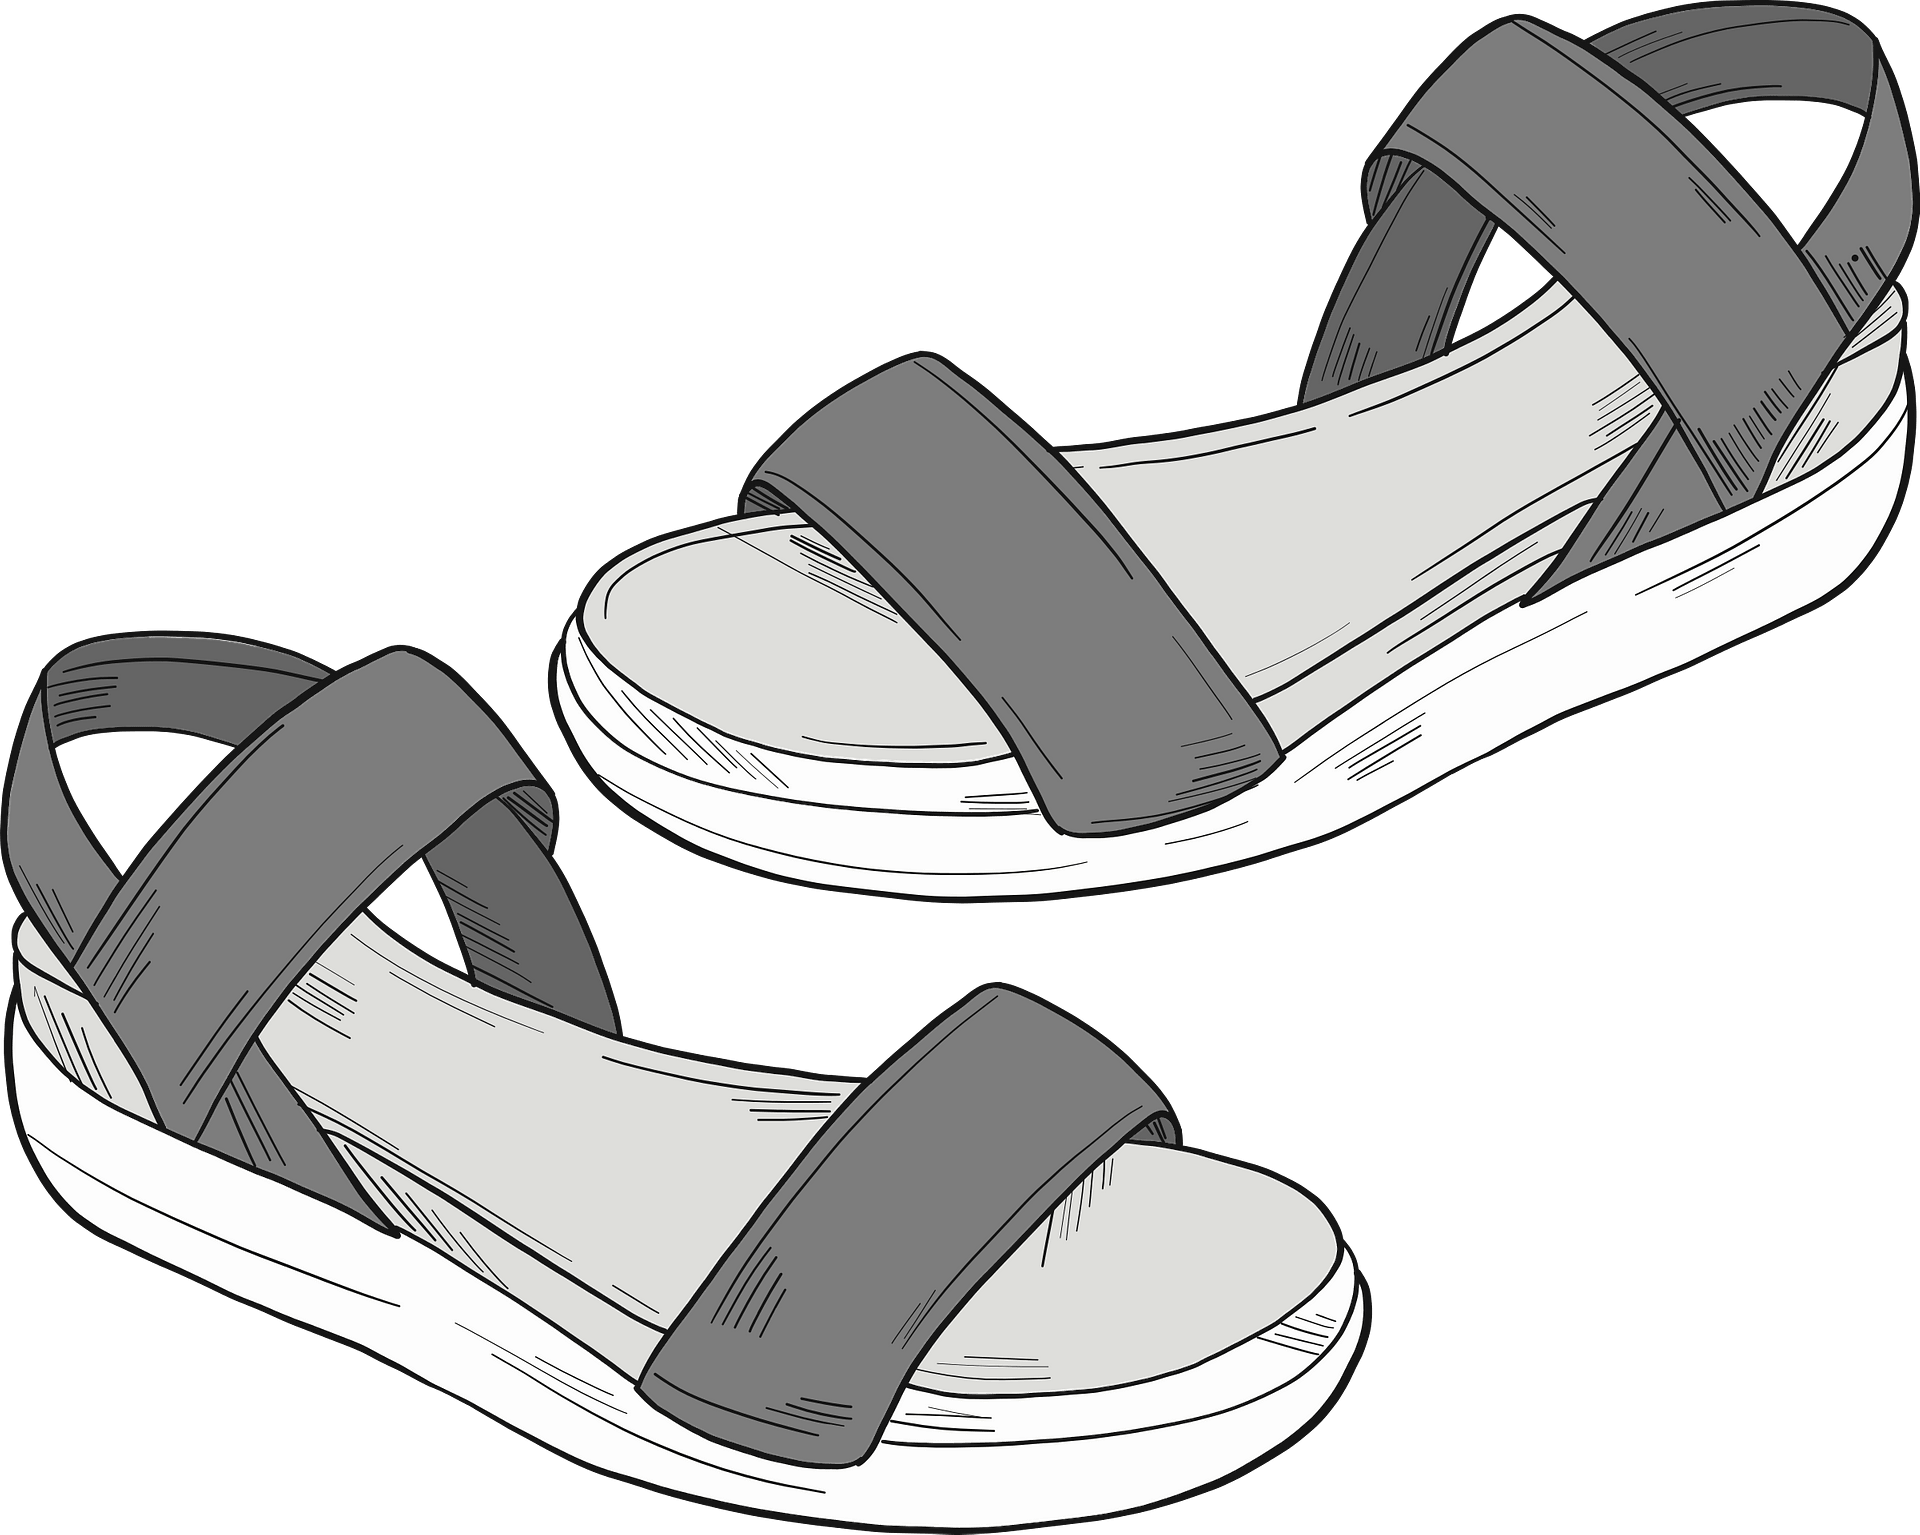 Leather Sandals Stock Illustrations – 3,204 Leather Sandals Stock ...